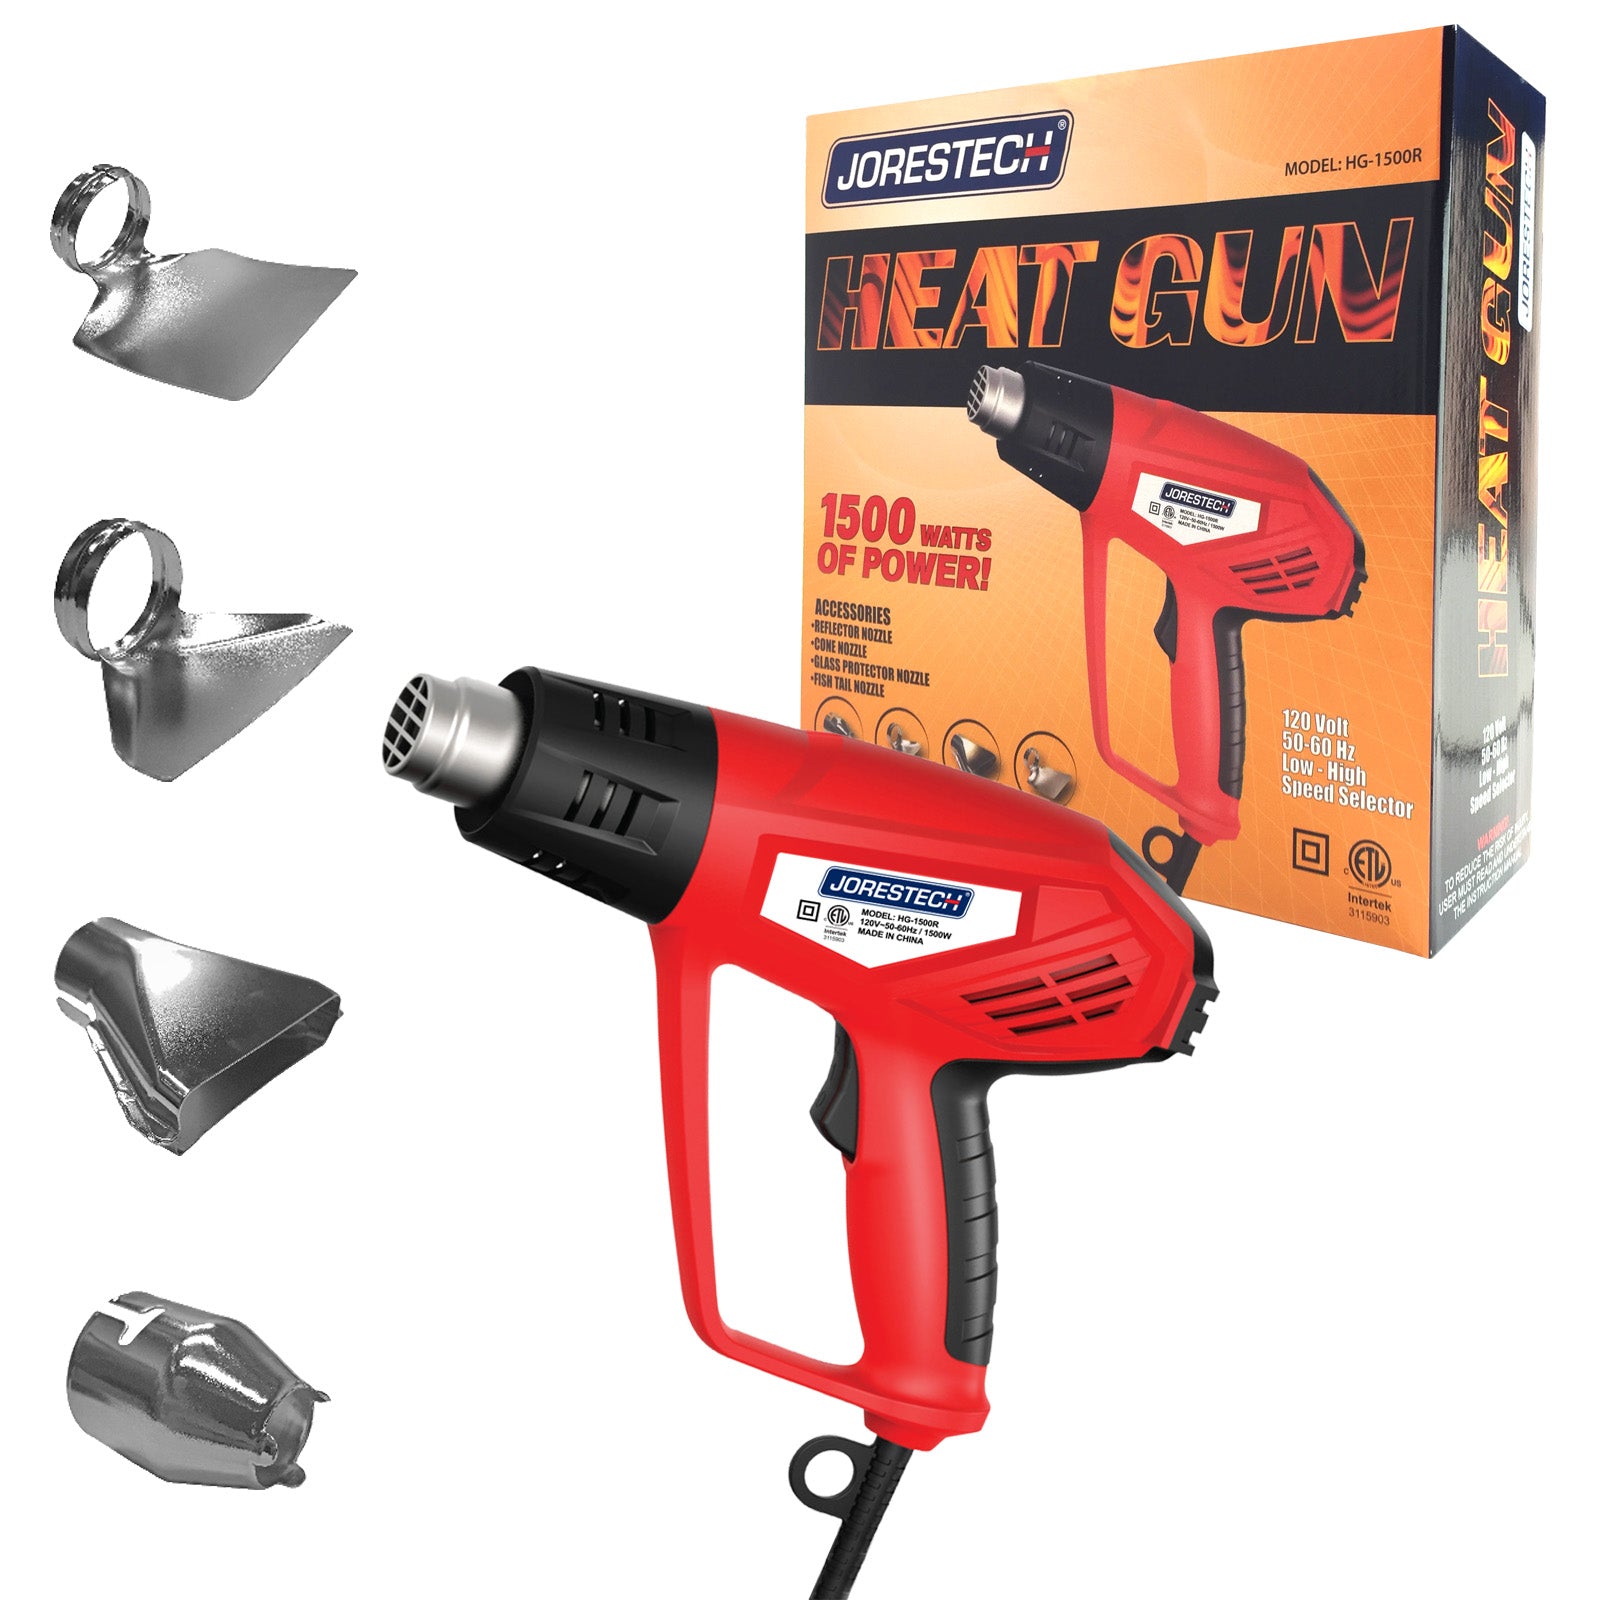 Shrink wrap heat gun by JORES TECHNOLOGIES® next to its packaging box.  Nozzle tips included: reflector nozzle, cone nozzle, glass protector nozzle, and fish tail nozzle